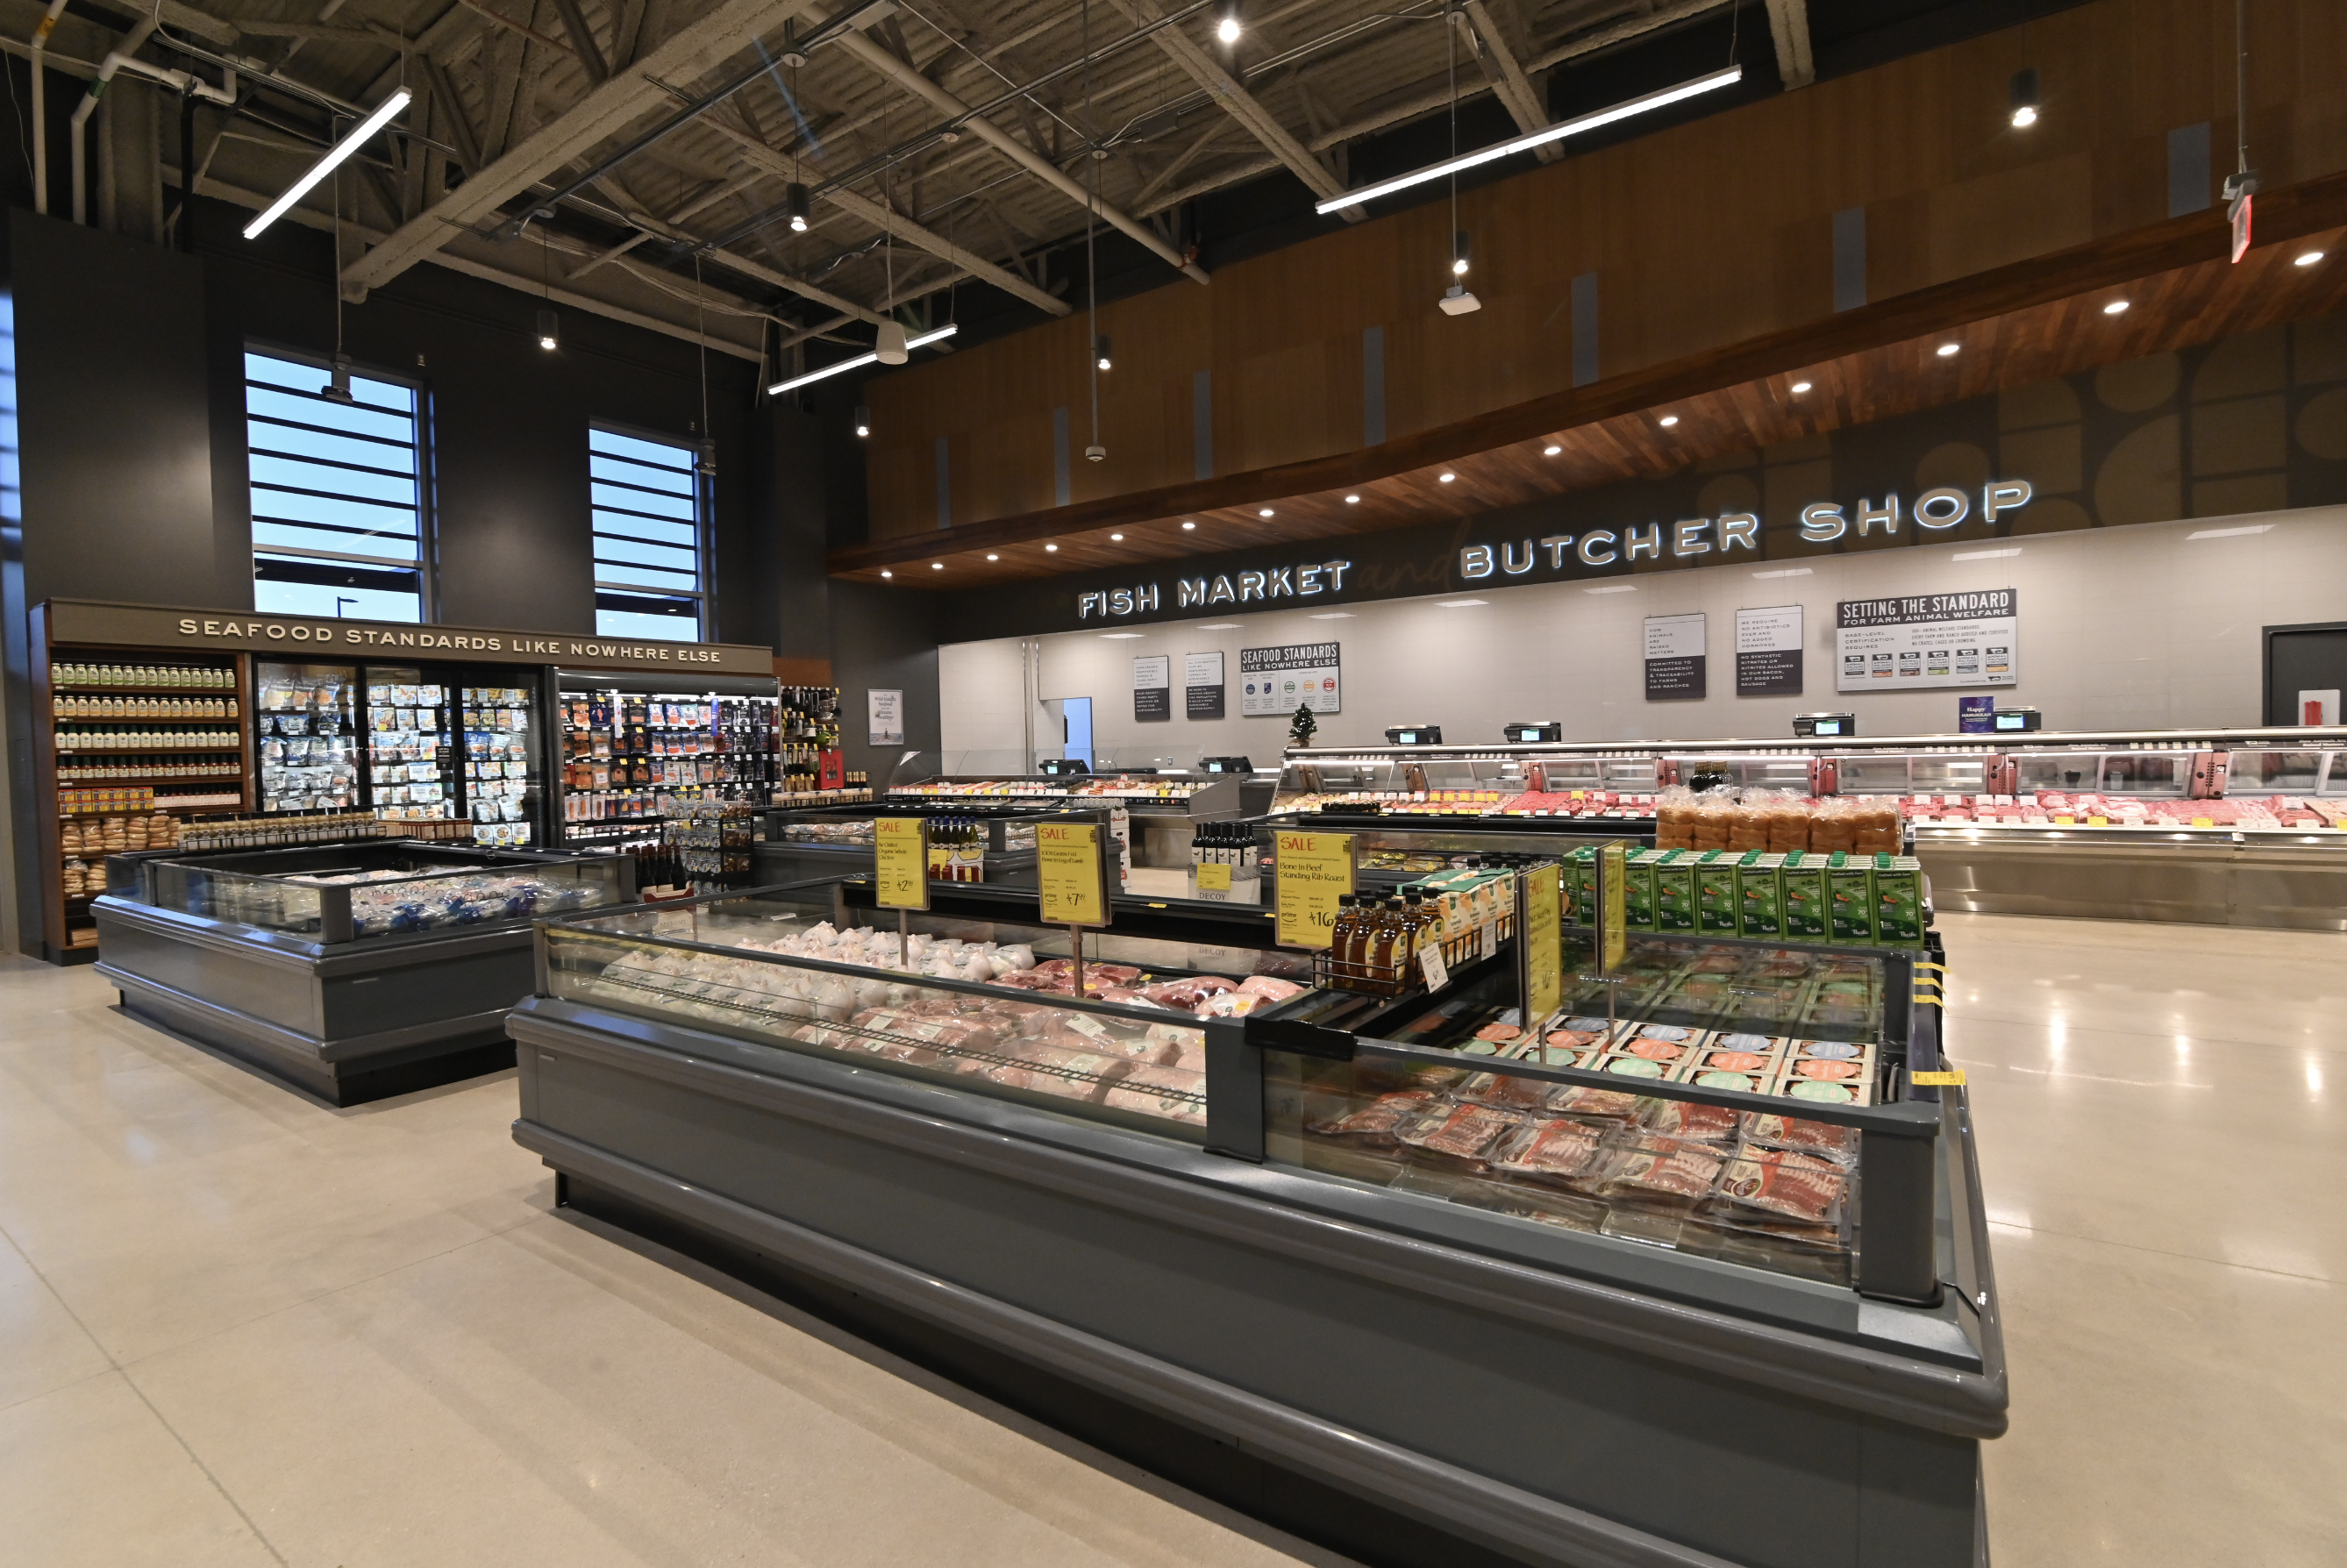 New Whole Foods Market in Madison, Wisconsin, to Open Dec. 13